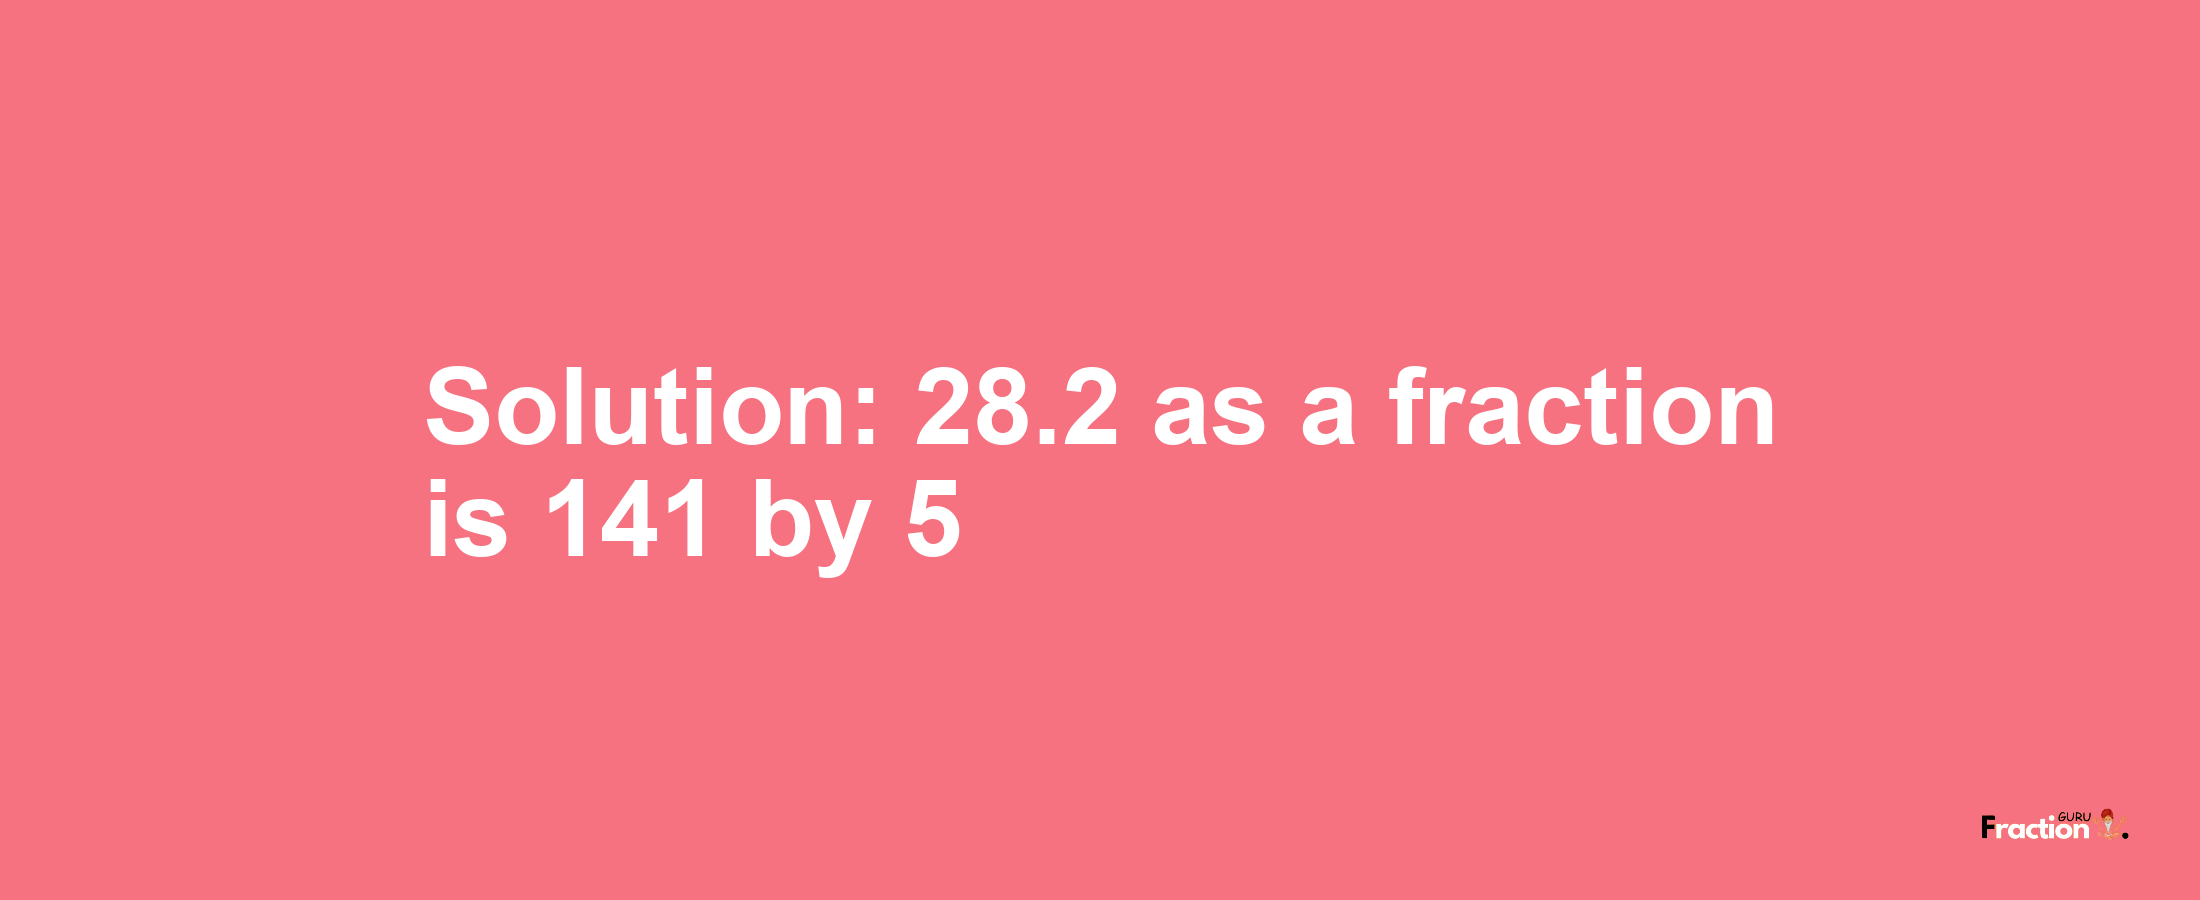 Solution:28.2 as a fraction is 141/5